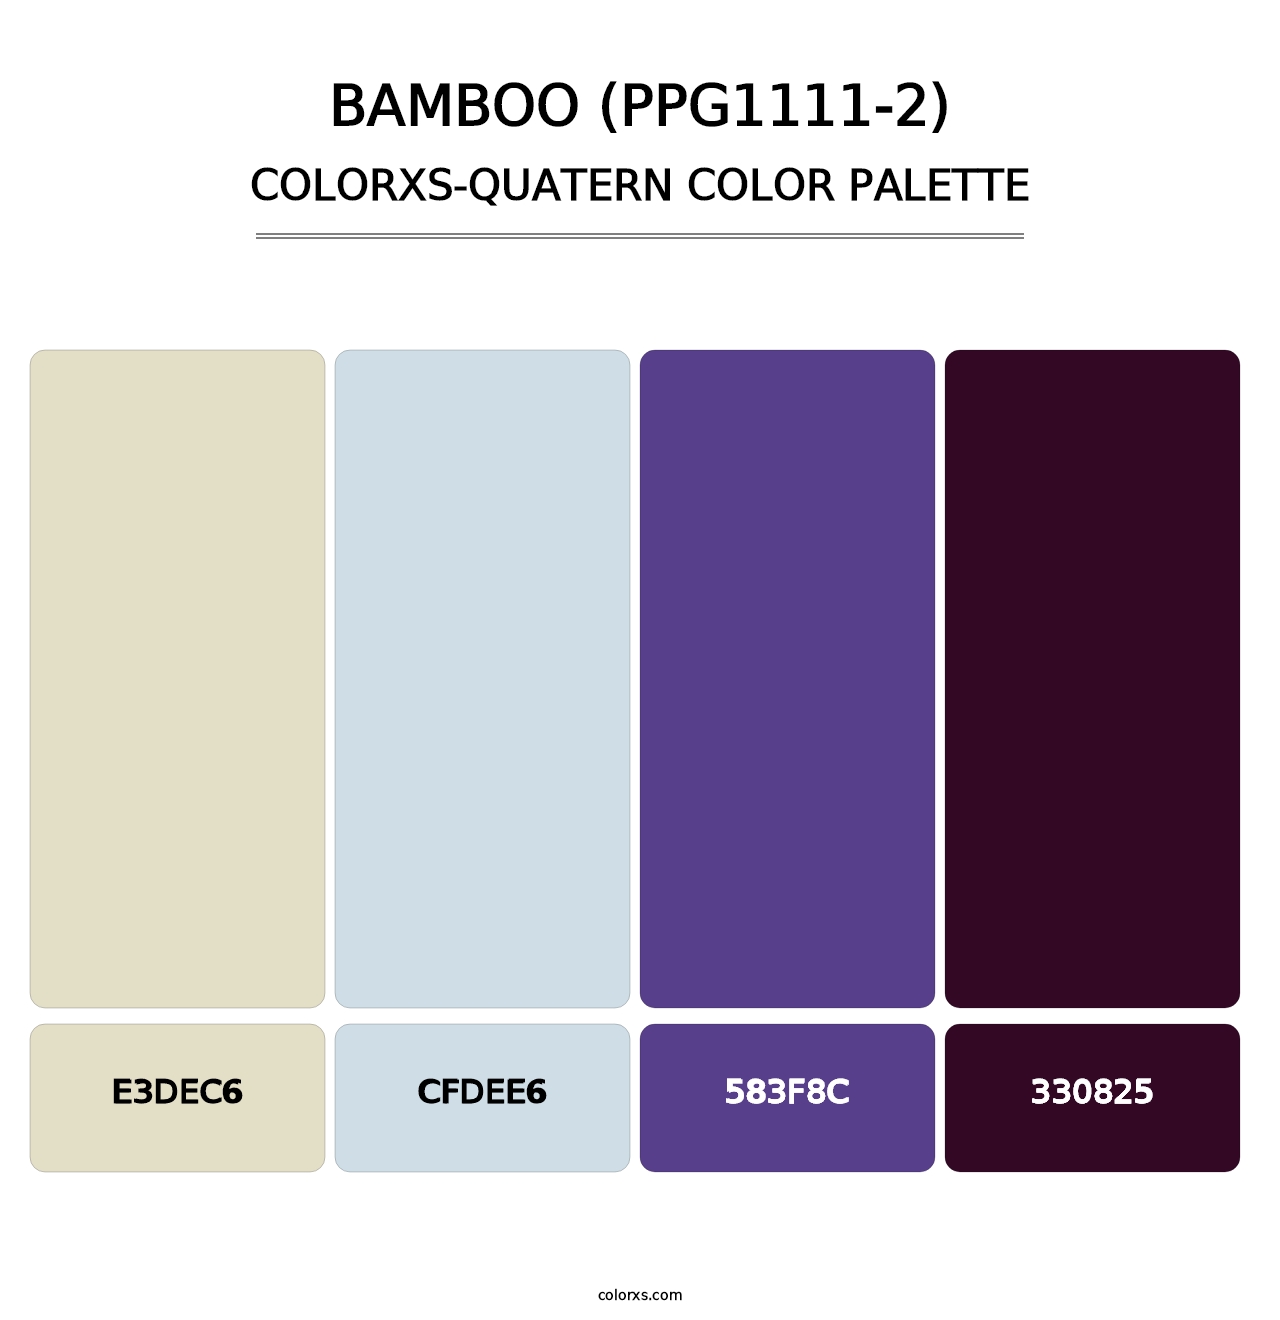 Bamboo (PPG1111-2) - Colorxs Quatern Palette